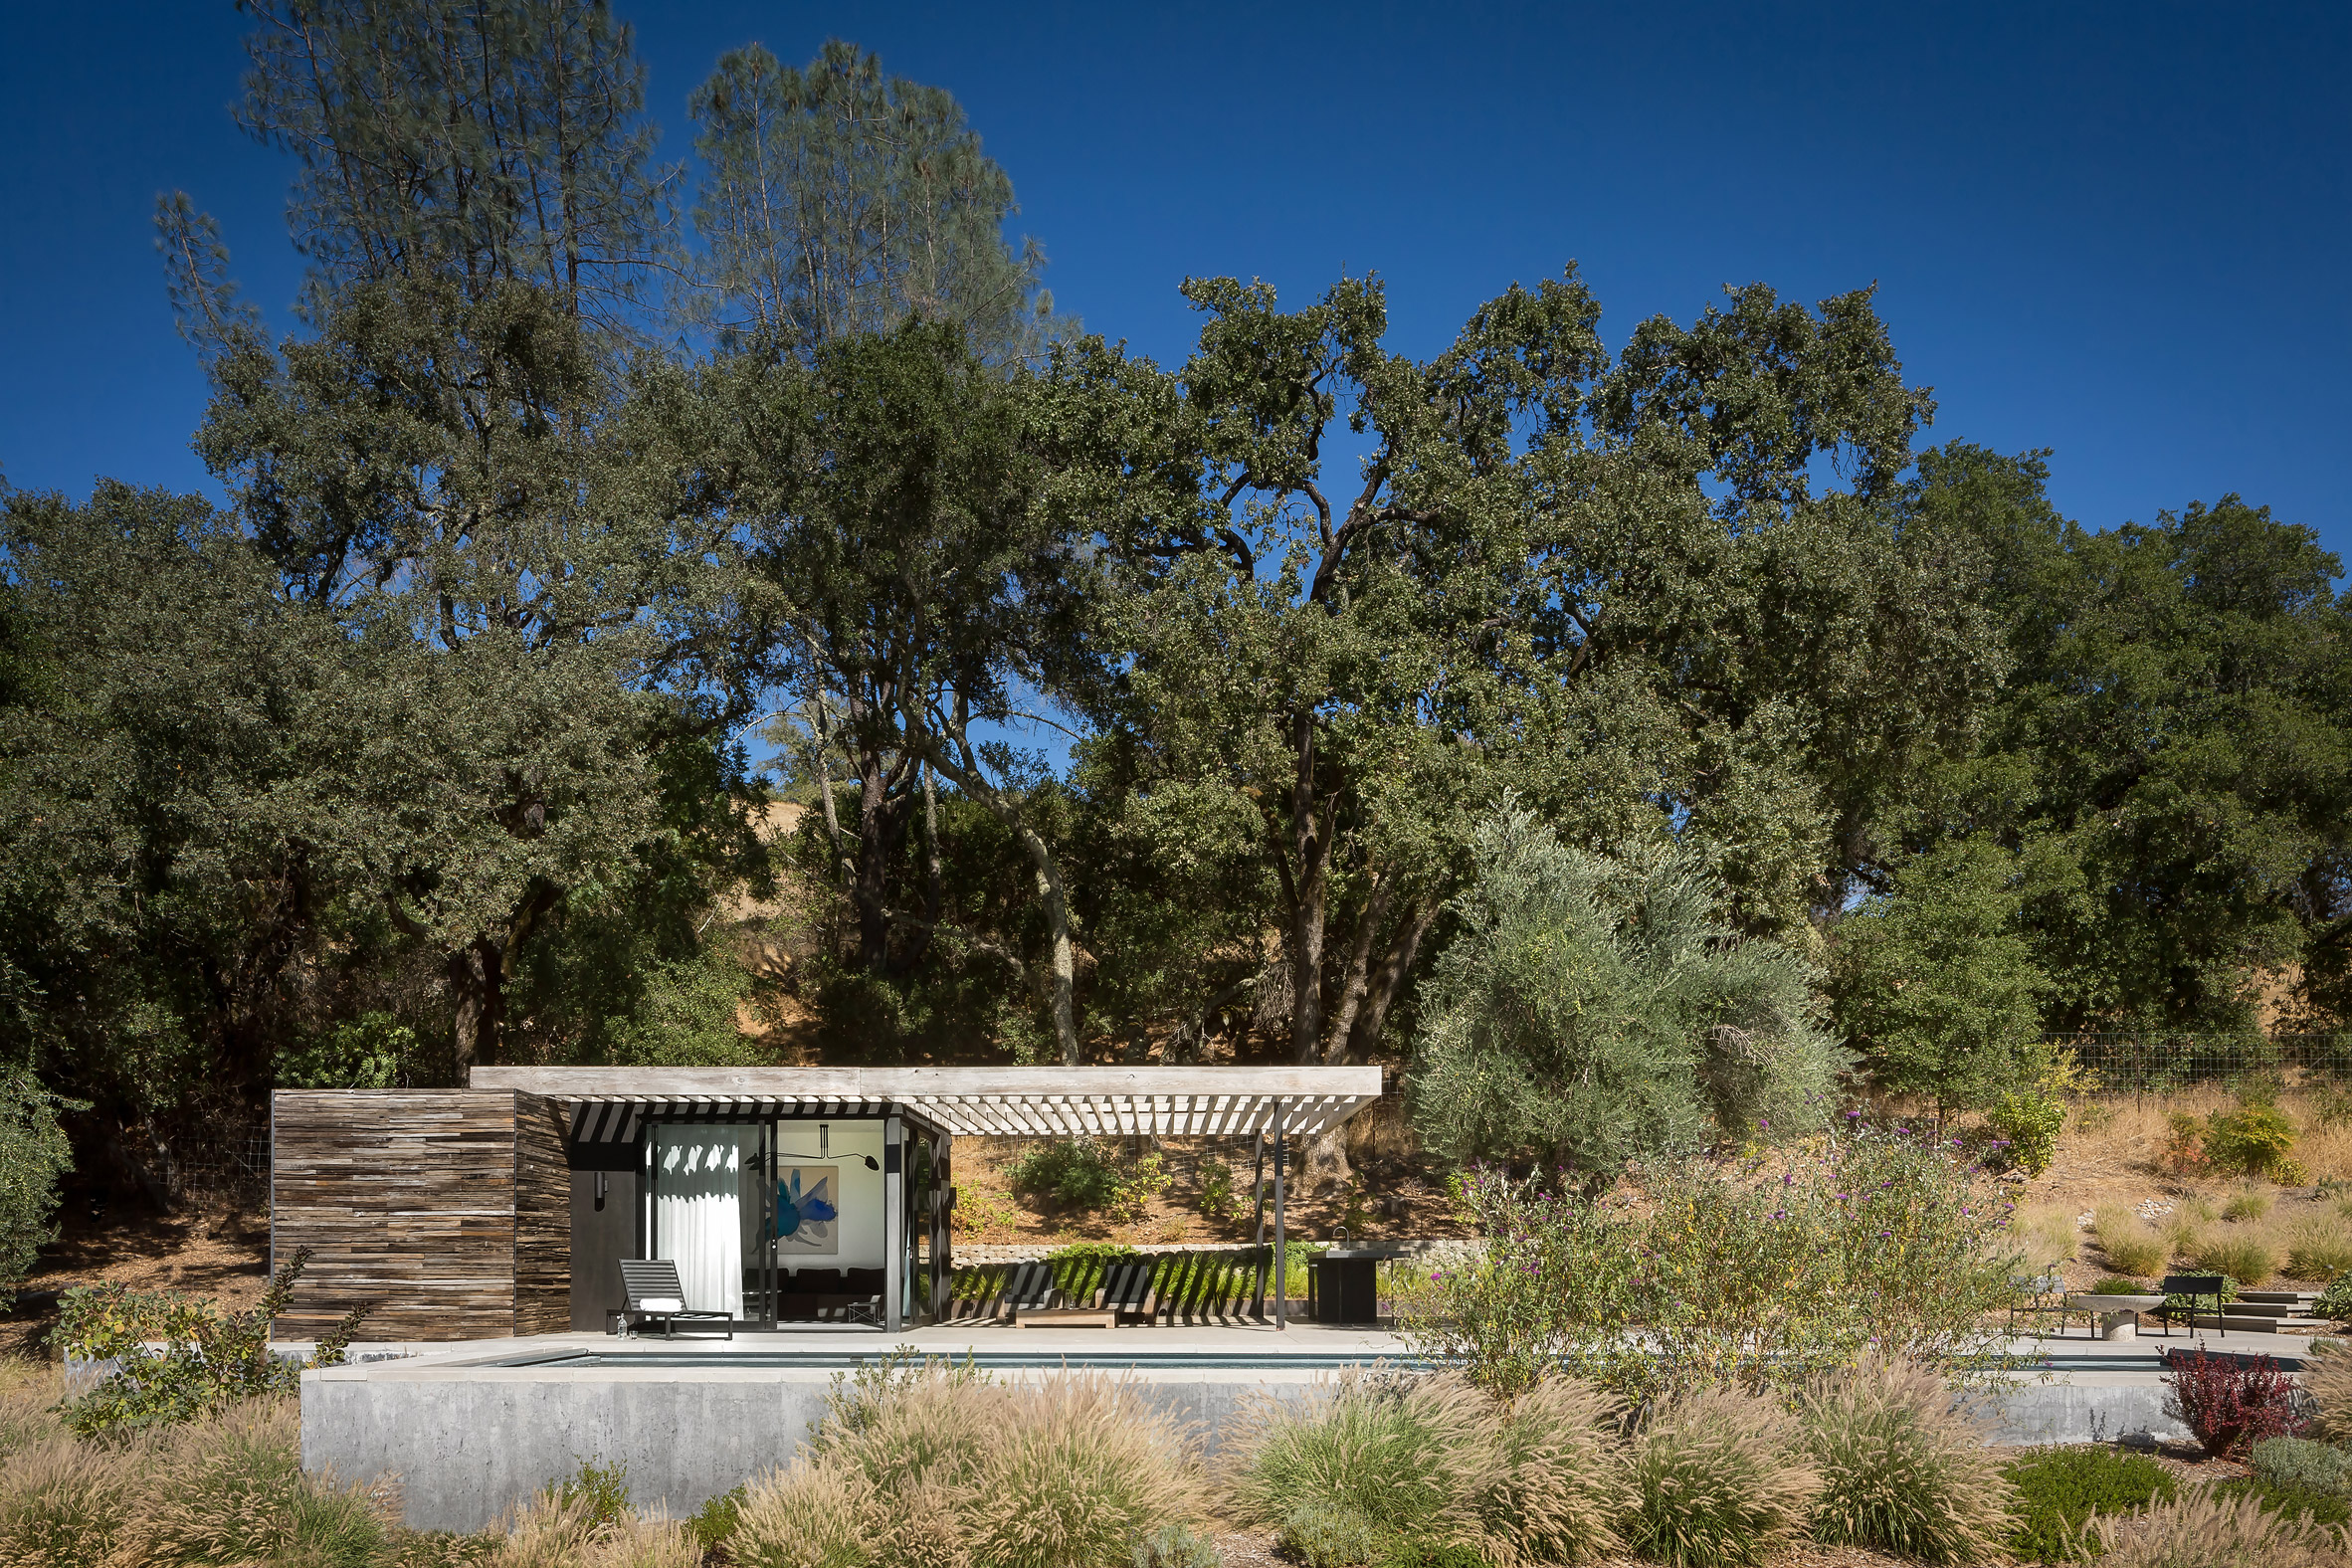 Pool house by Ro Rockett Design offers views of California wine country